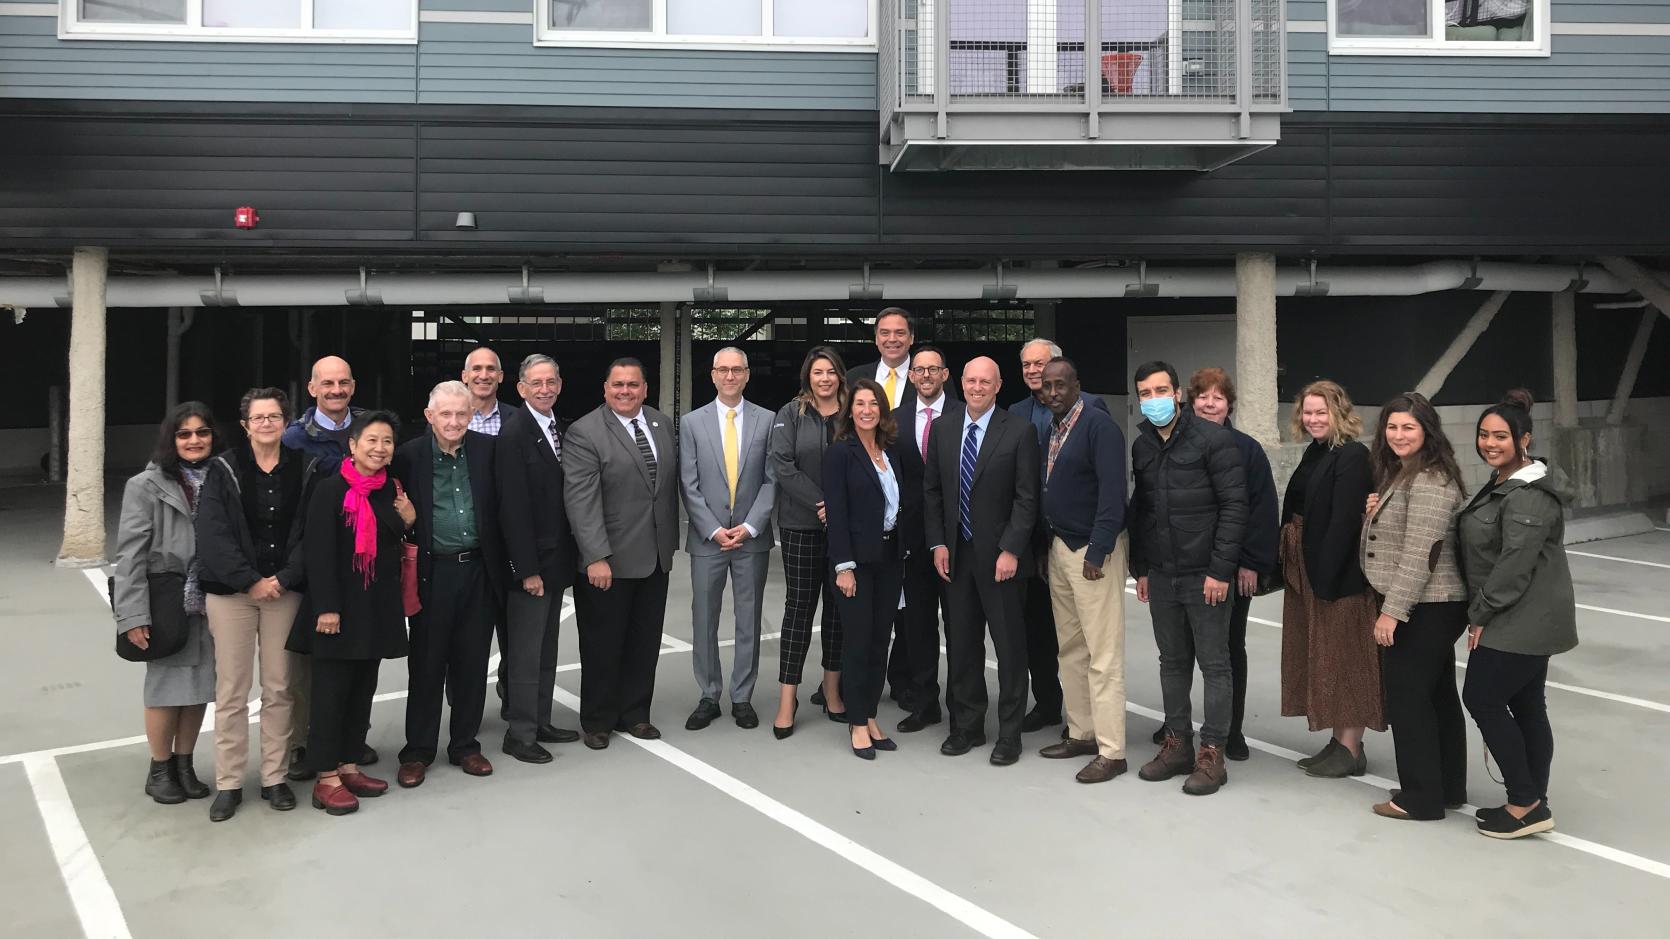 Lt. Governor Polito and Secretary Kennealy in Revere celebrating the Community Investment Tax Credit. 